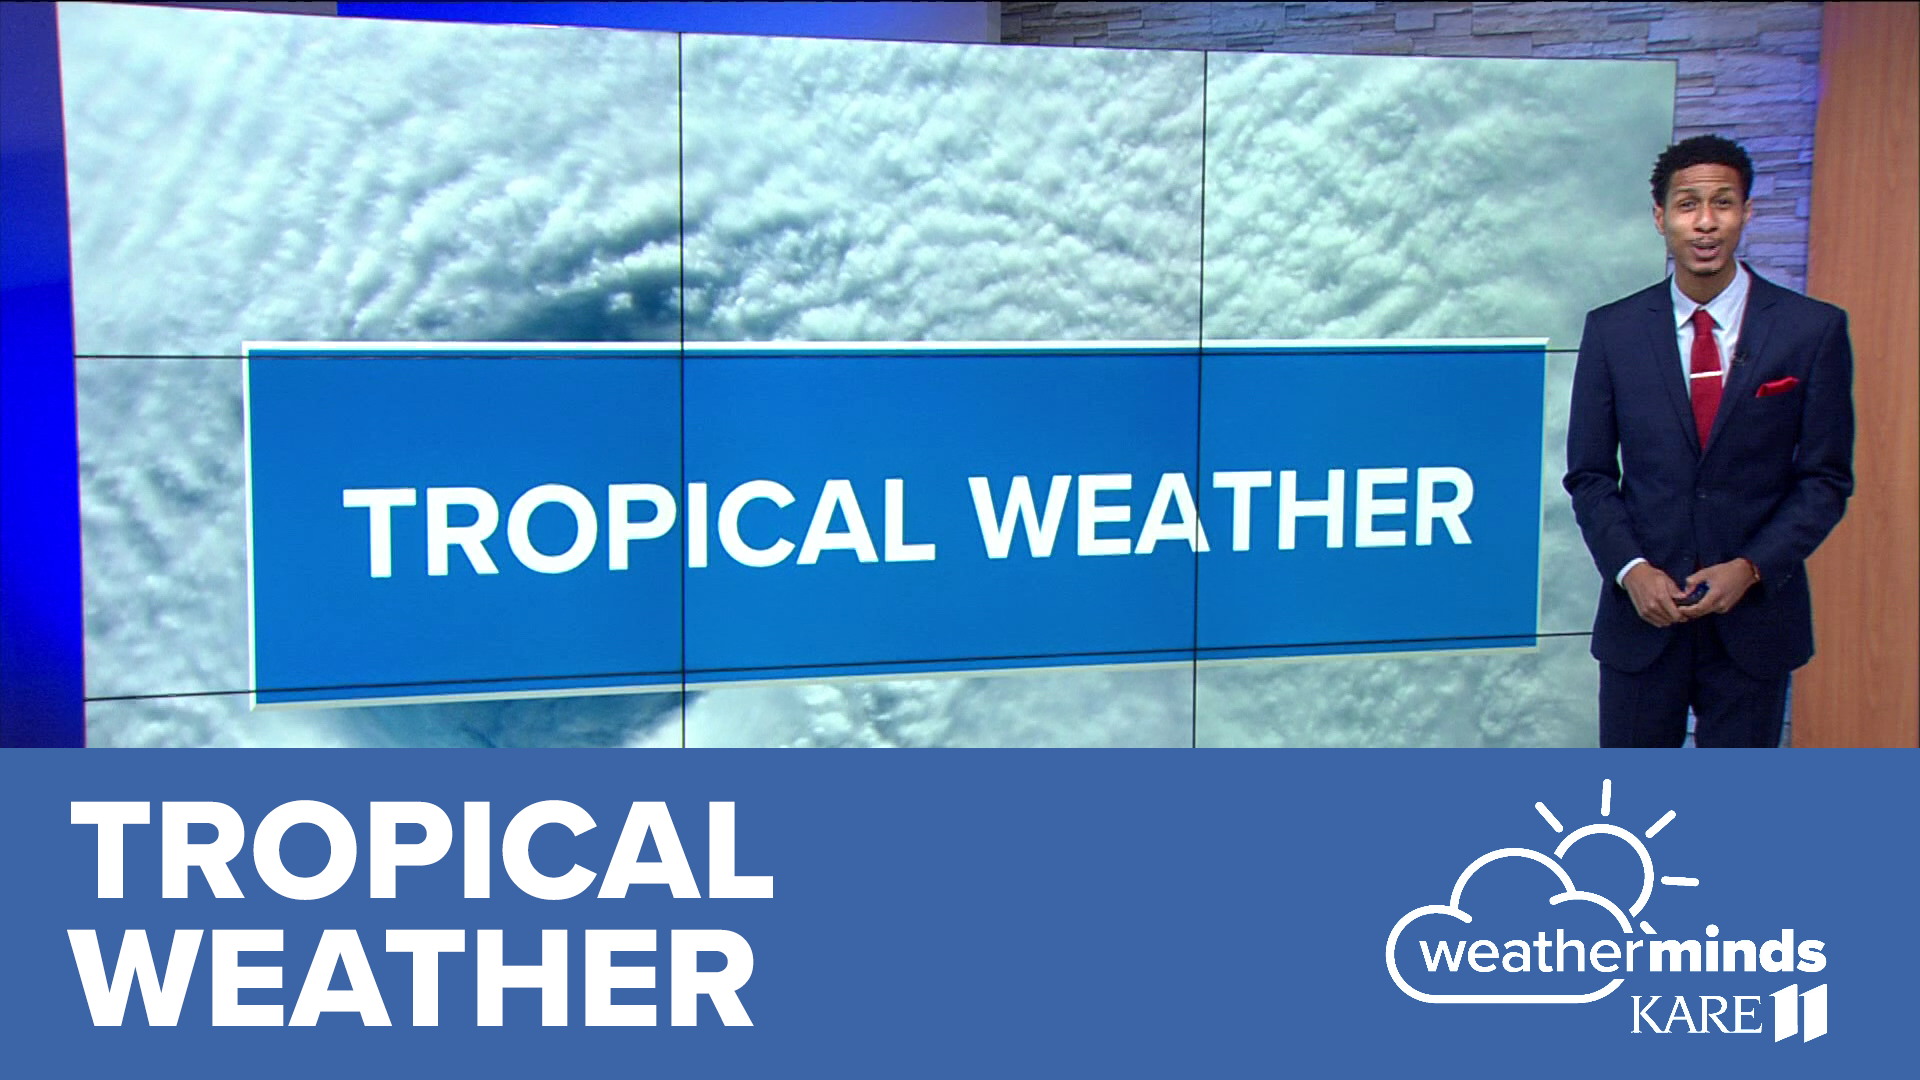 The KARE 11 weather team takes you on a trip south for a lesson in tropical storms and hurricanes.